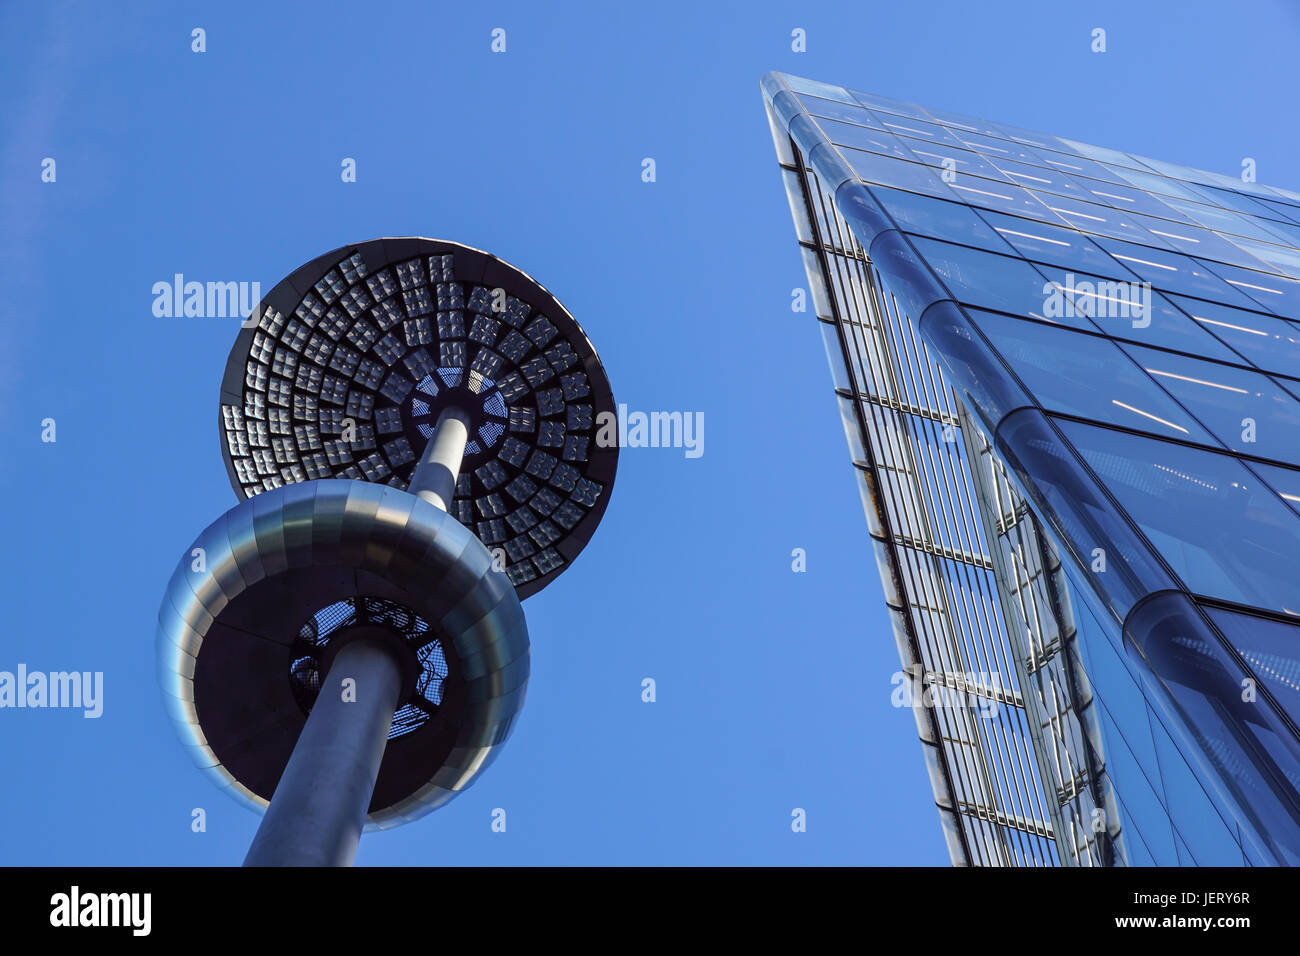 Lamp post in front of a Glass and concrete facade on a modern corporate skycraper building Stock Photo